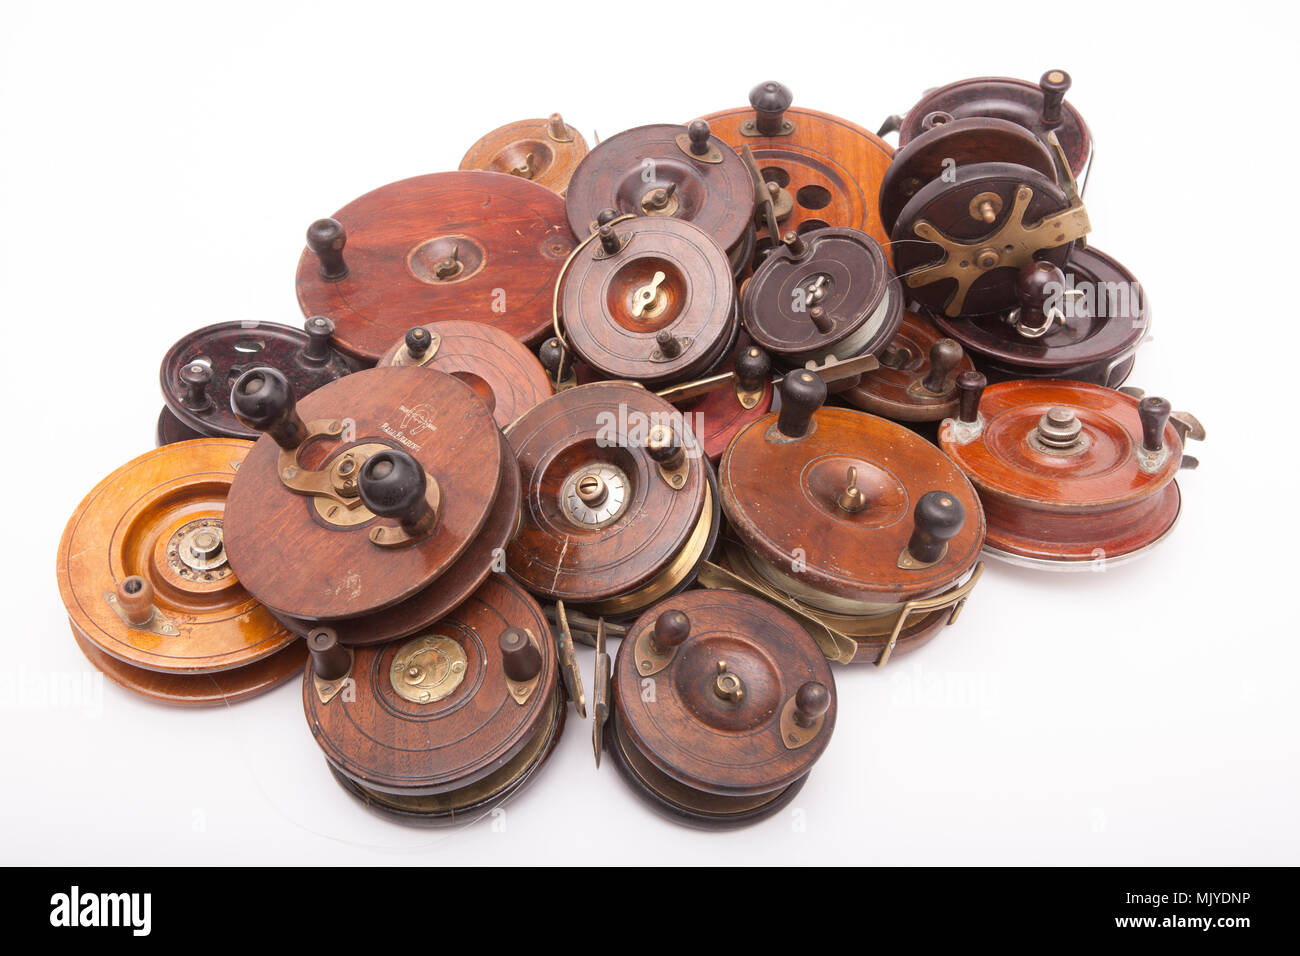 A collection of mostly wooden centrepin fishing reels from a large